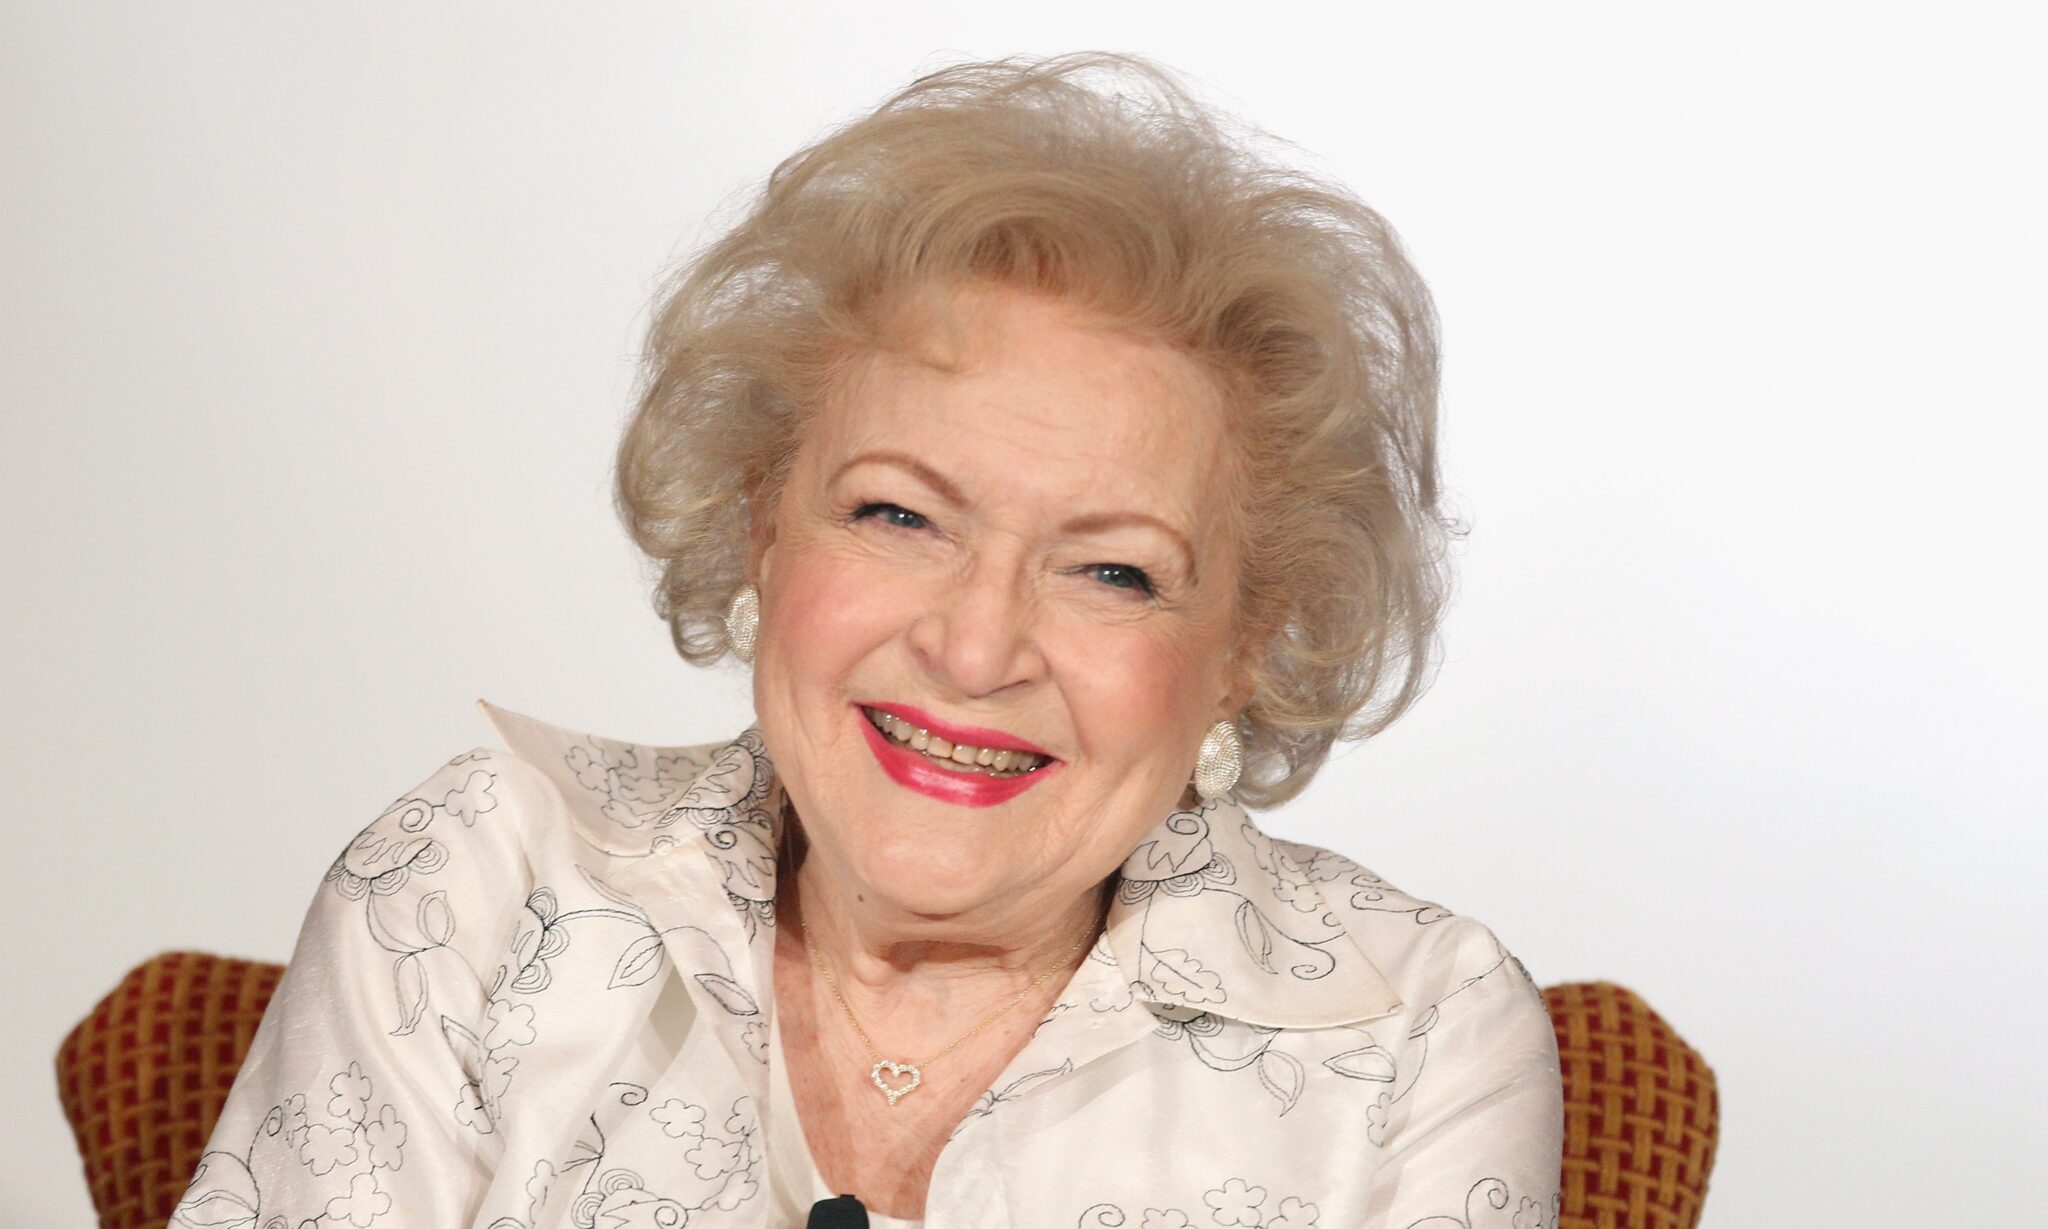 Google celebrates late Betty White's birthday with touching Golden Girls Easter egg